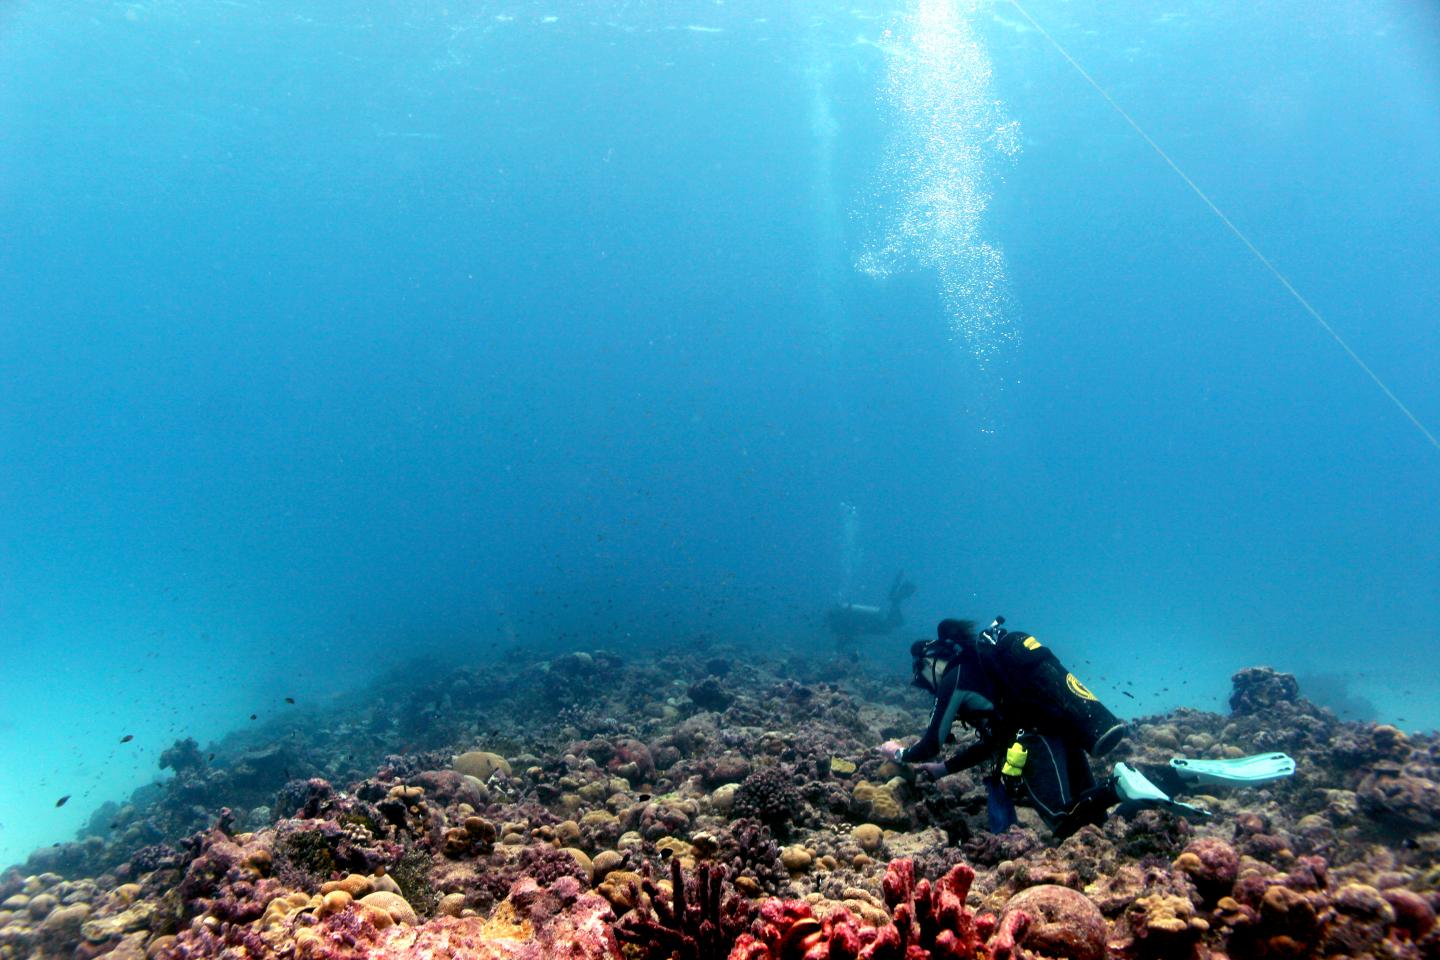 Coral recovery during a prolonged heatwave offers new hope